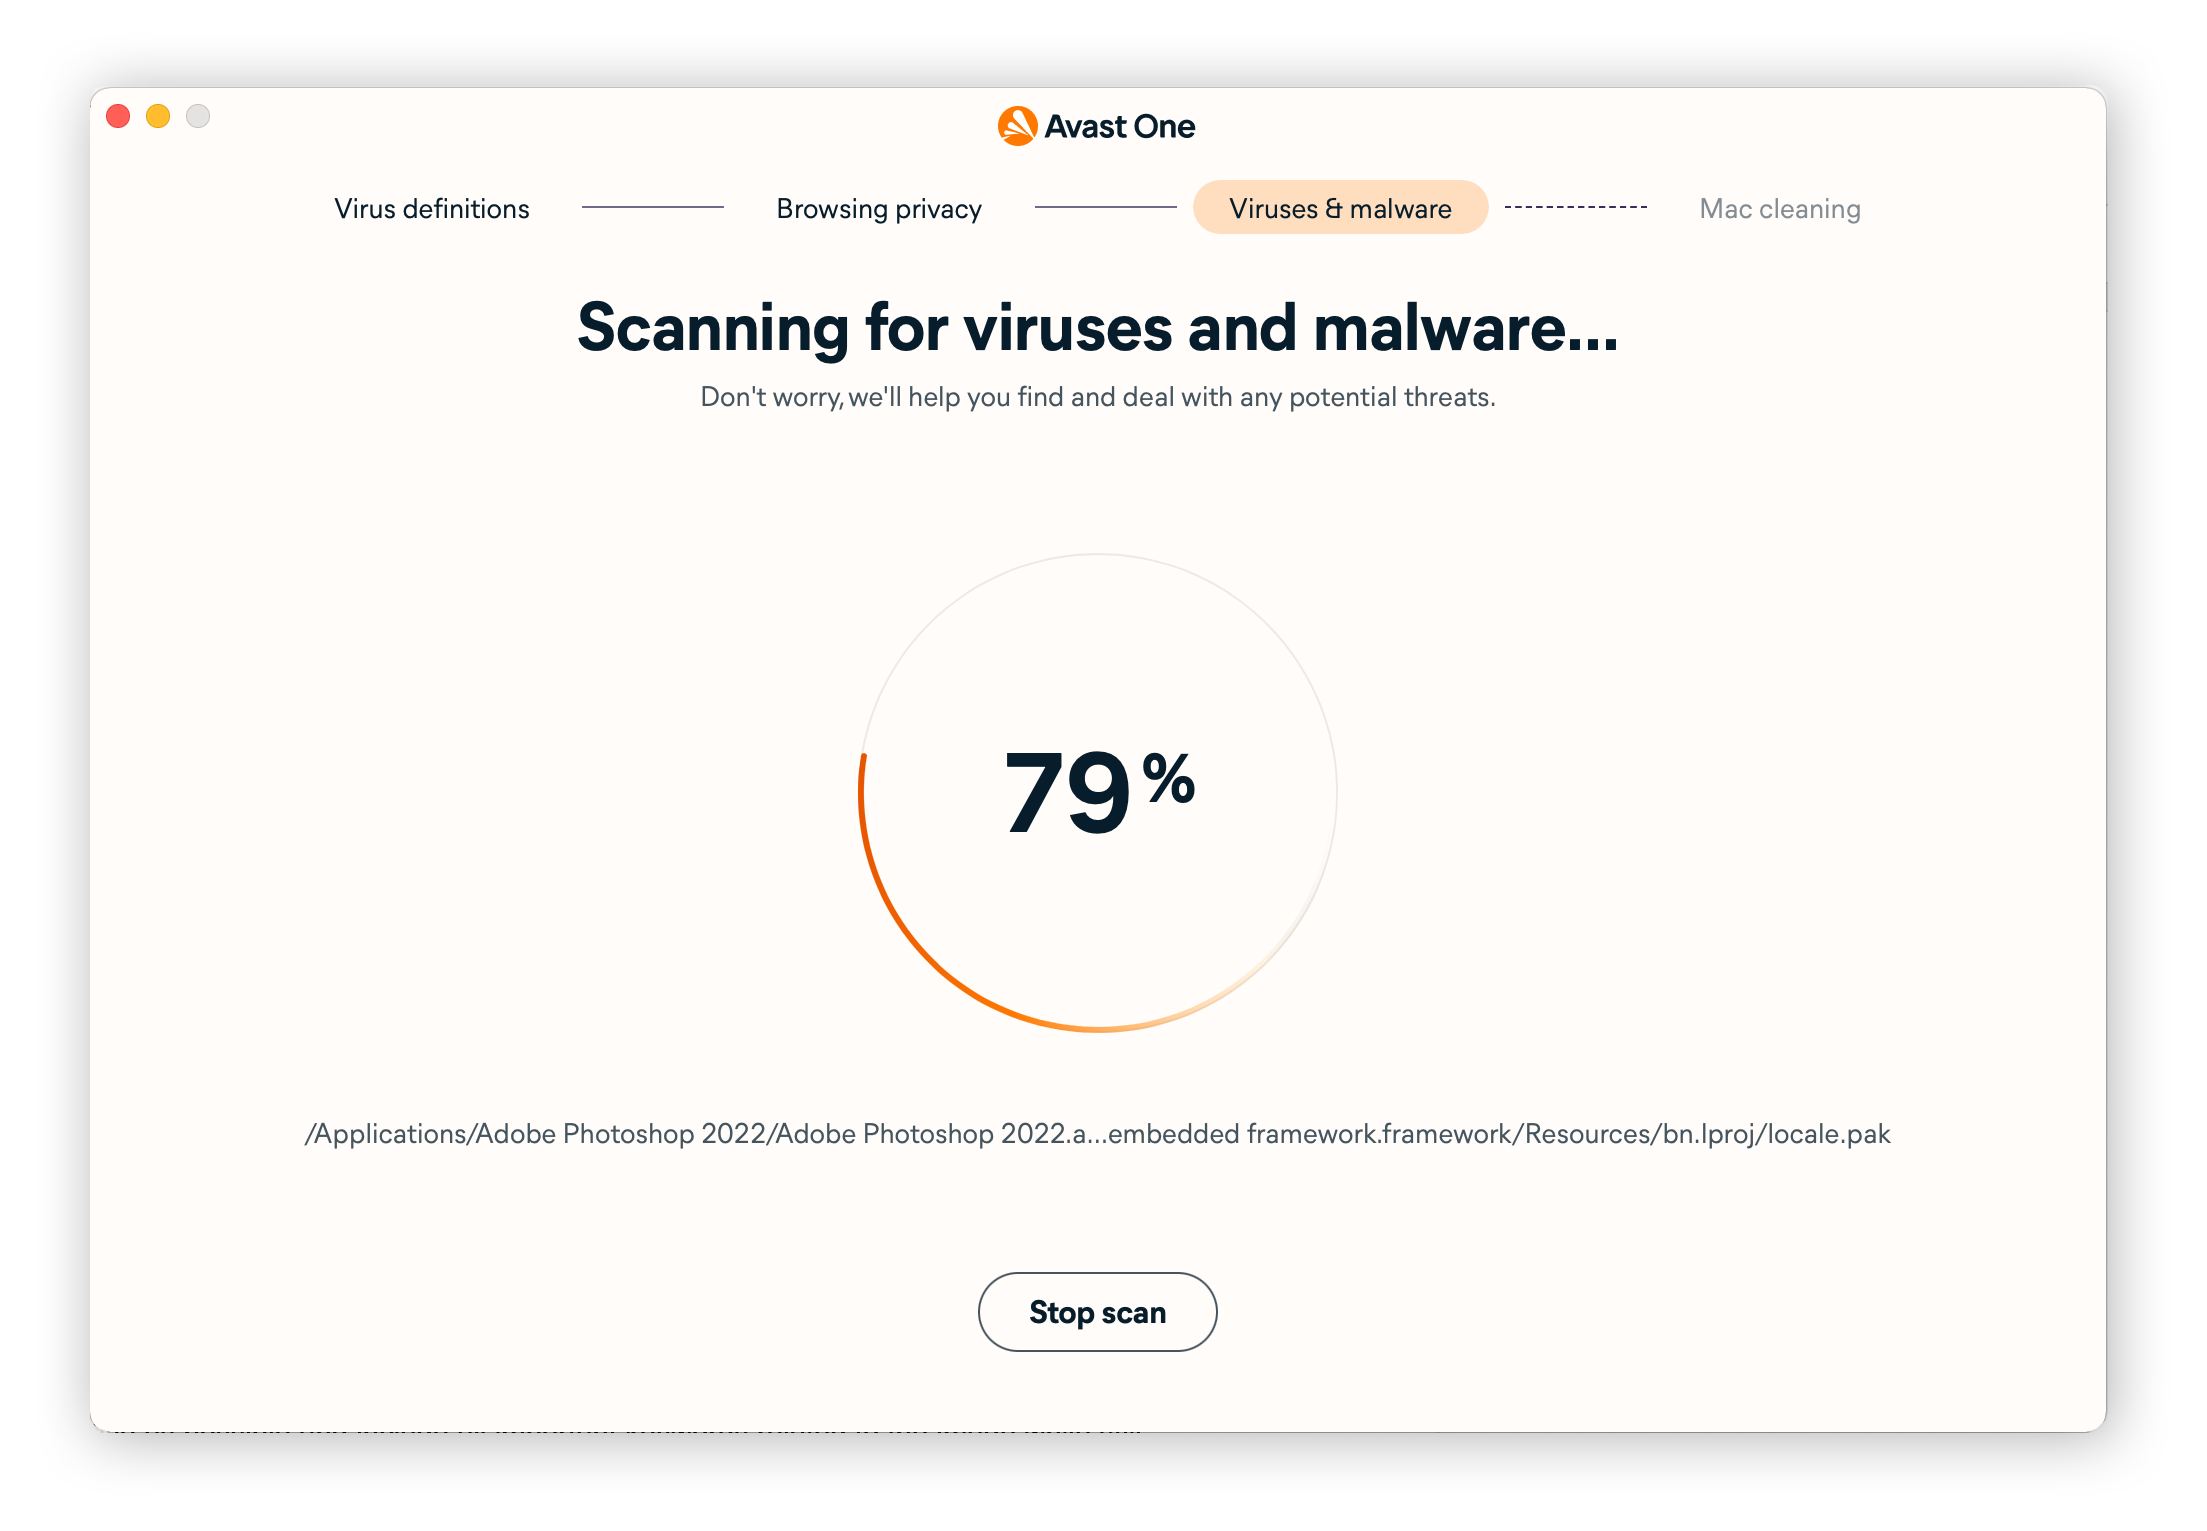 Scanning for viruses and malware with Avast One